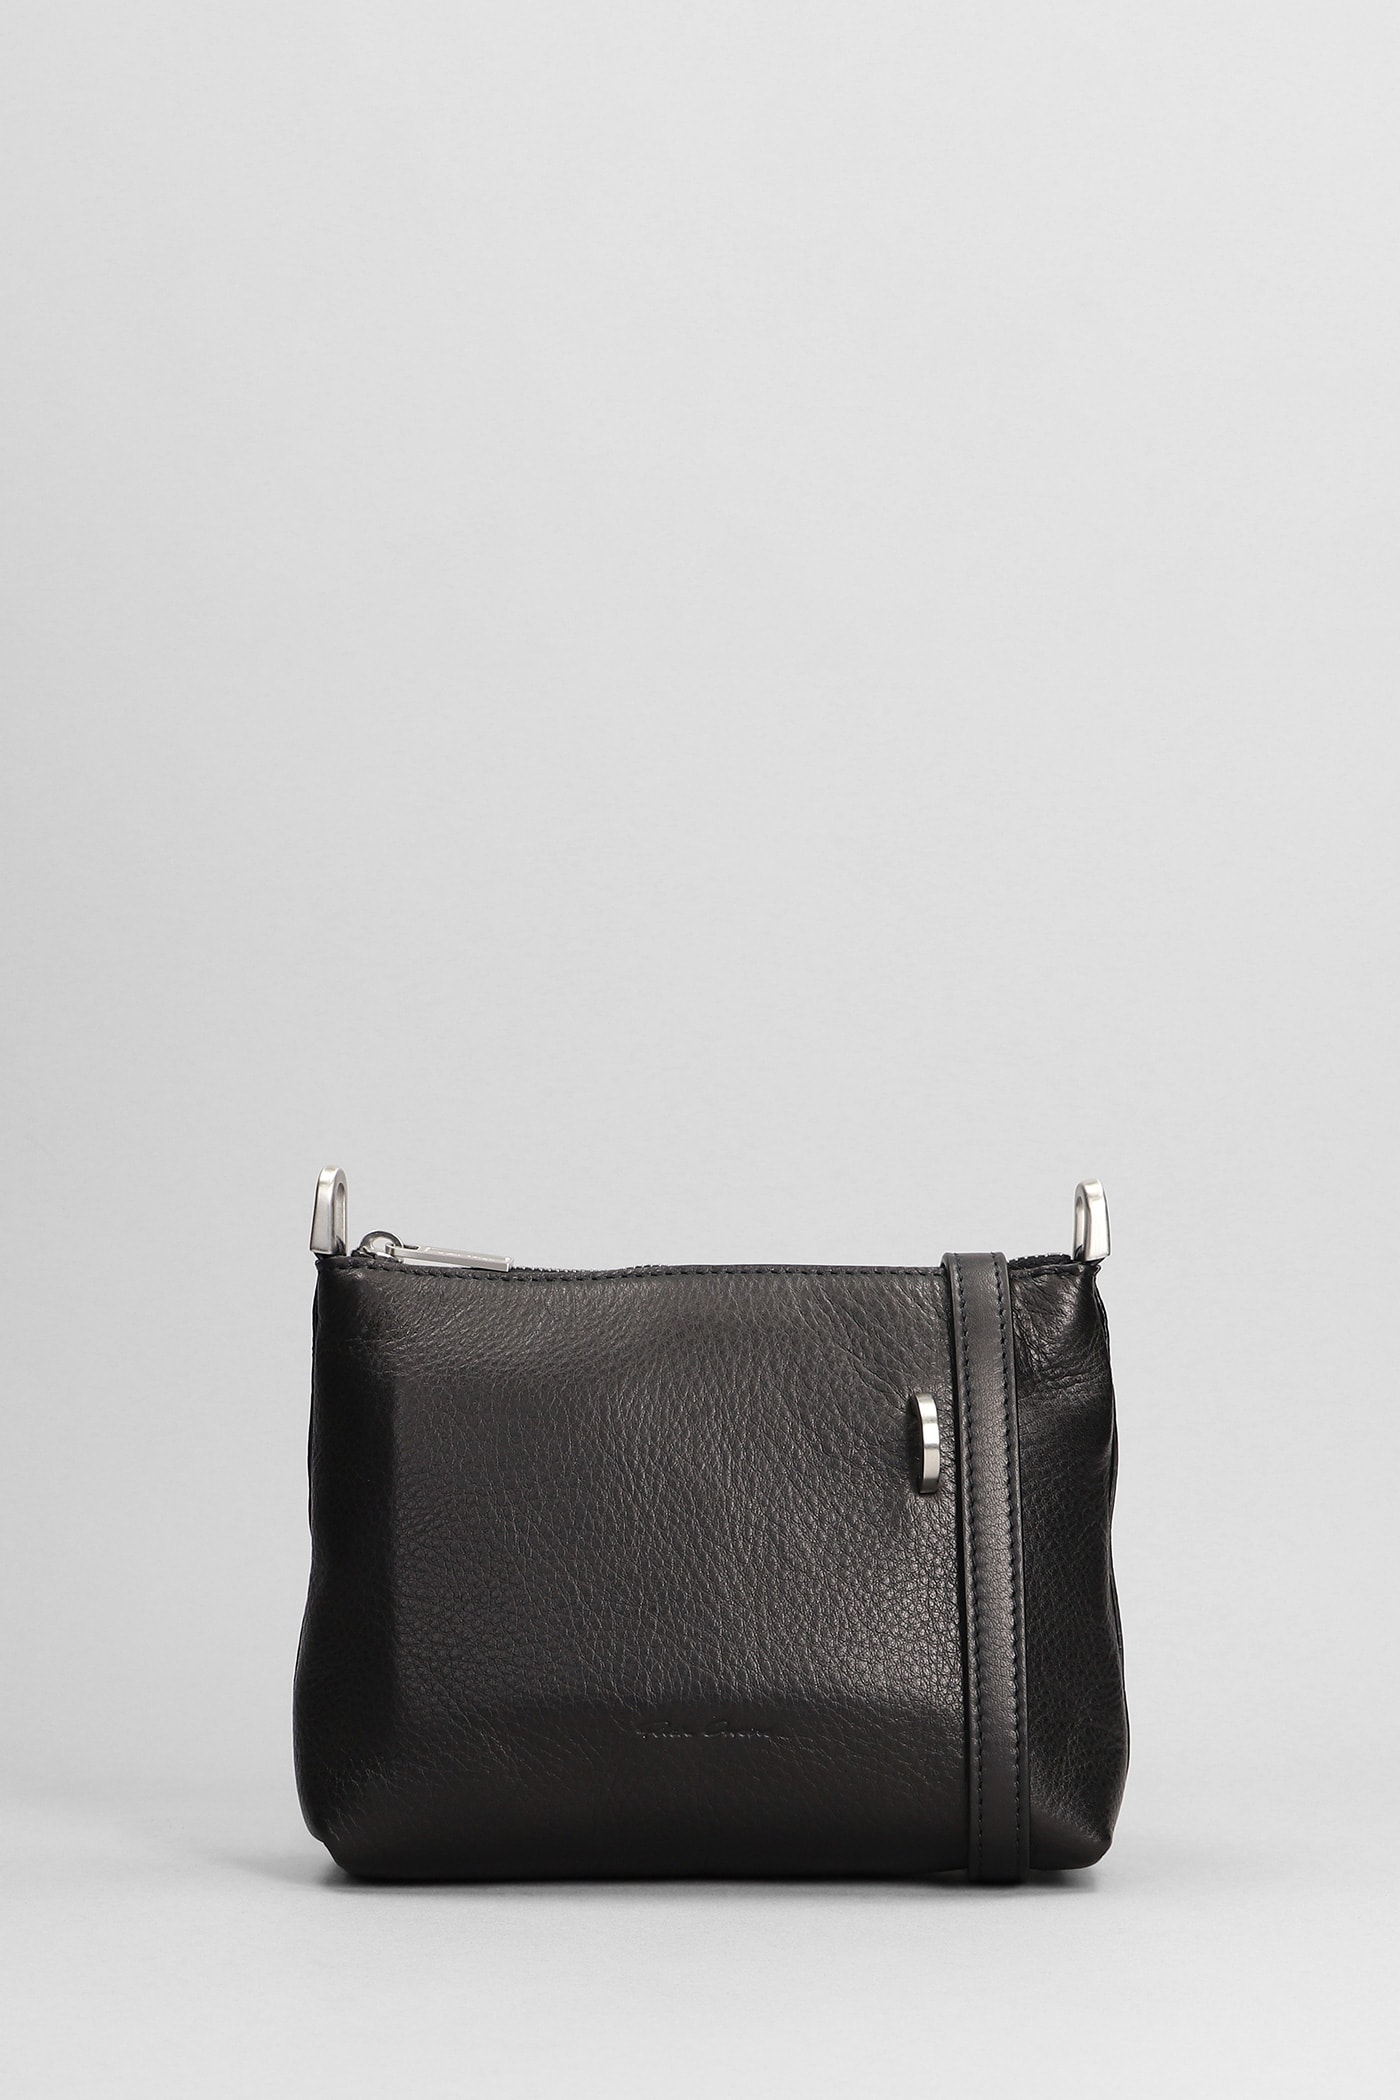 RICK OWENS SMALL ADRI HAND BAG IN BLACK LEATHER